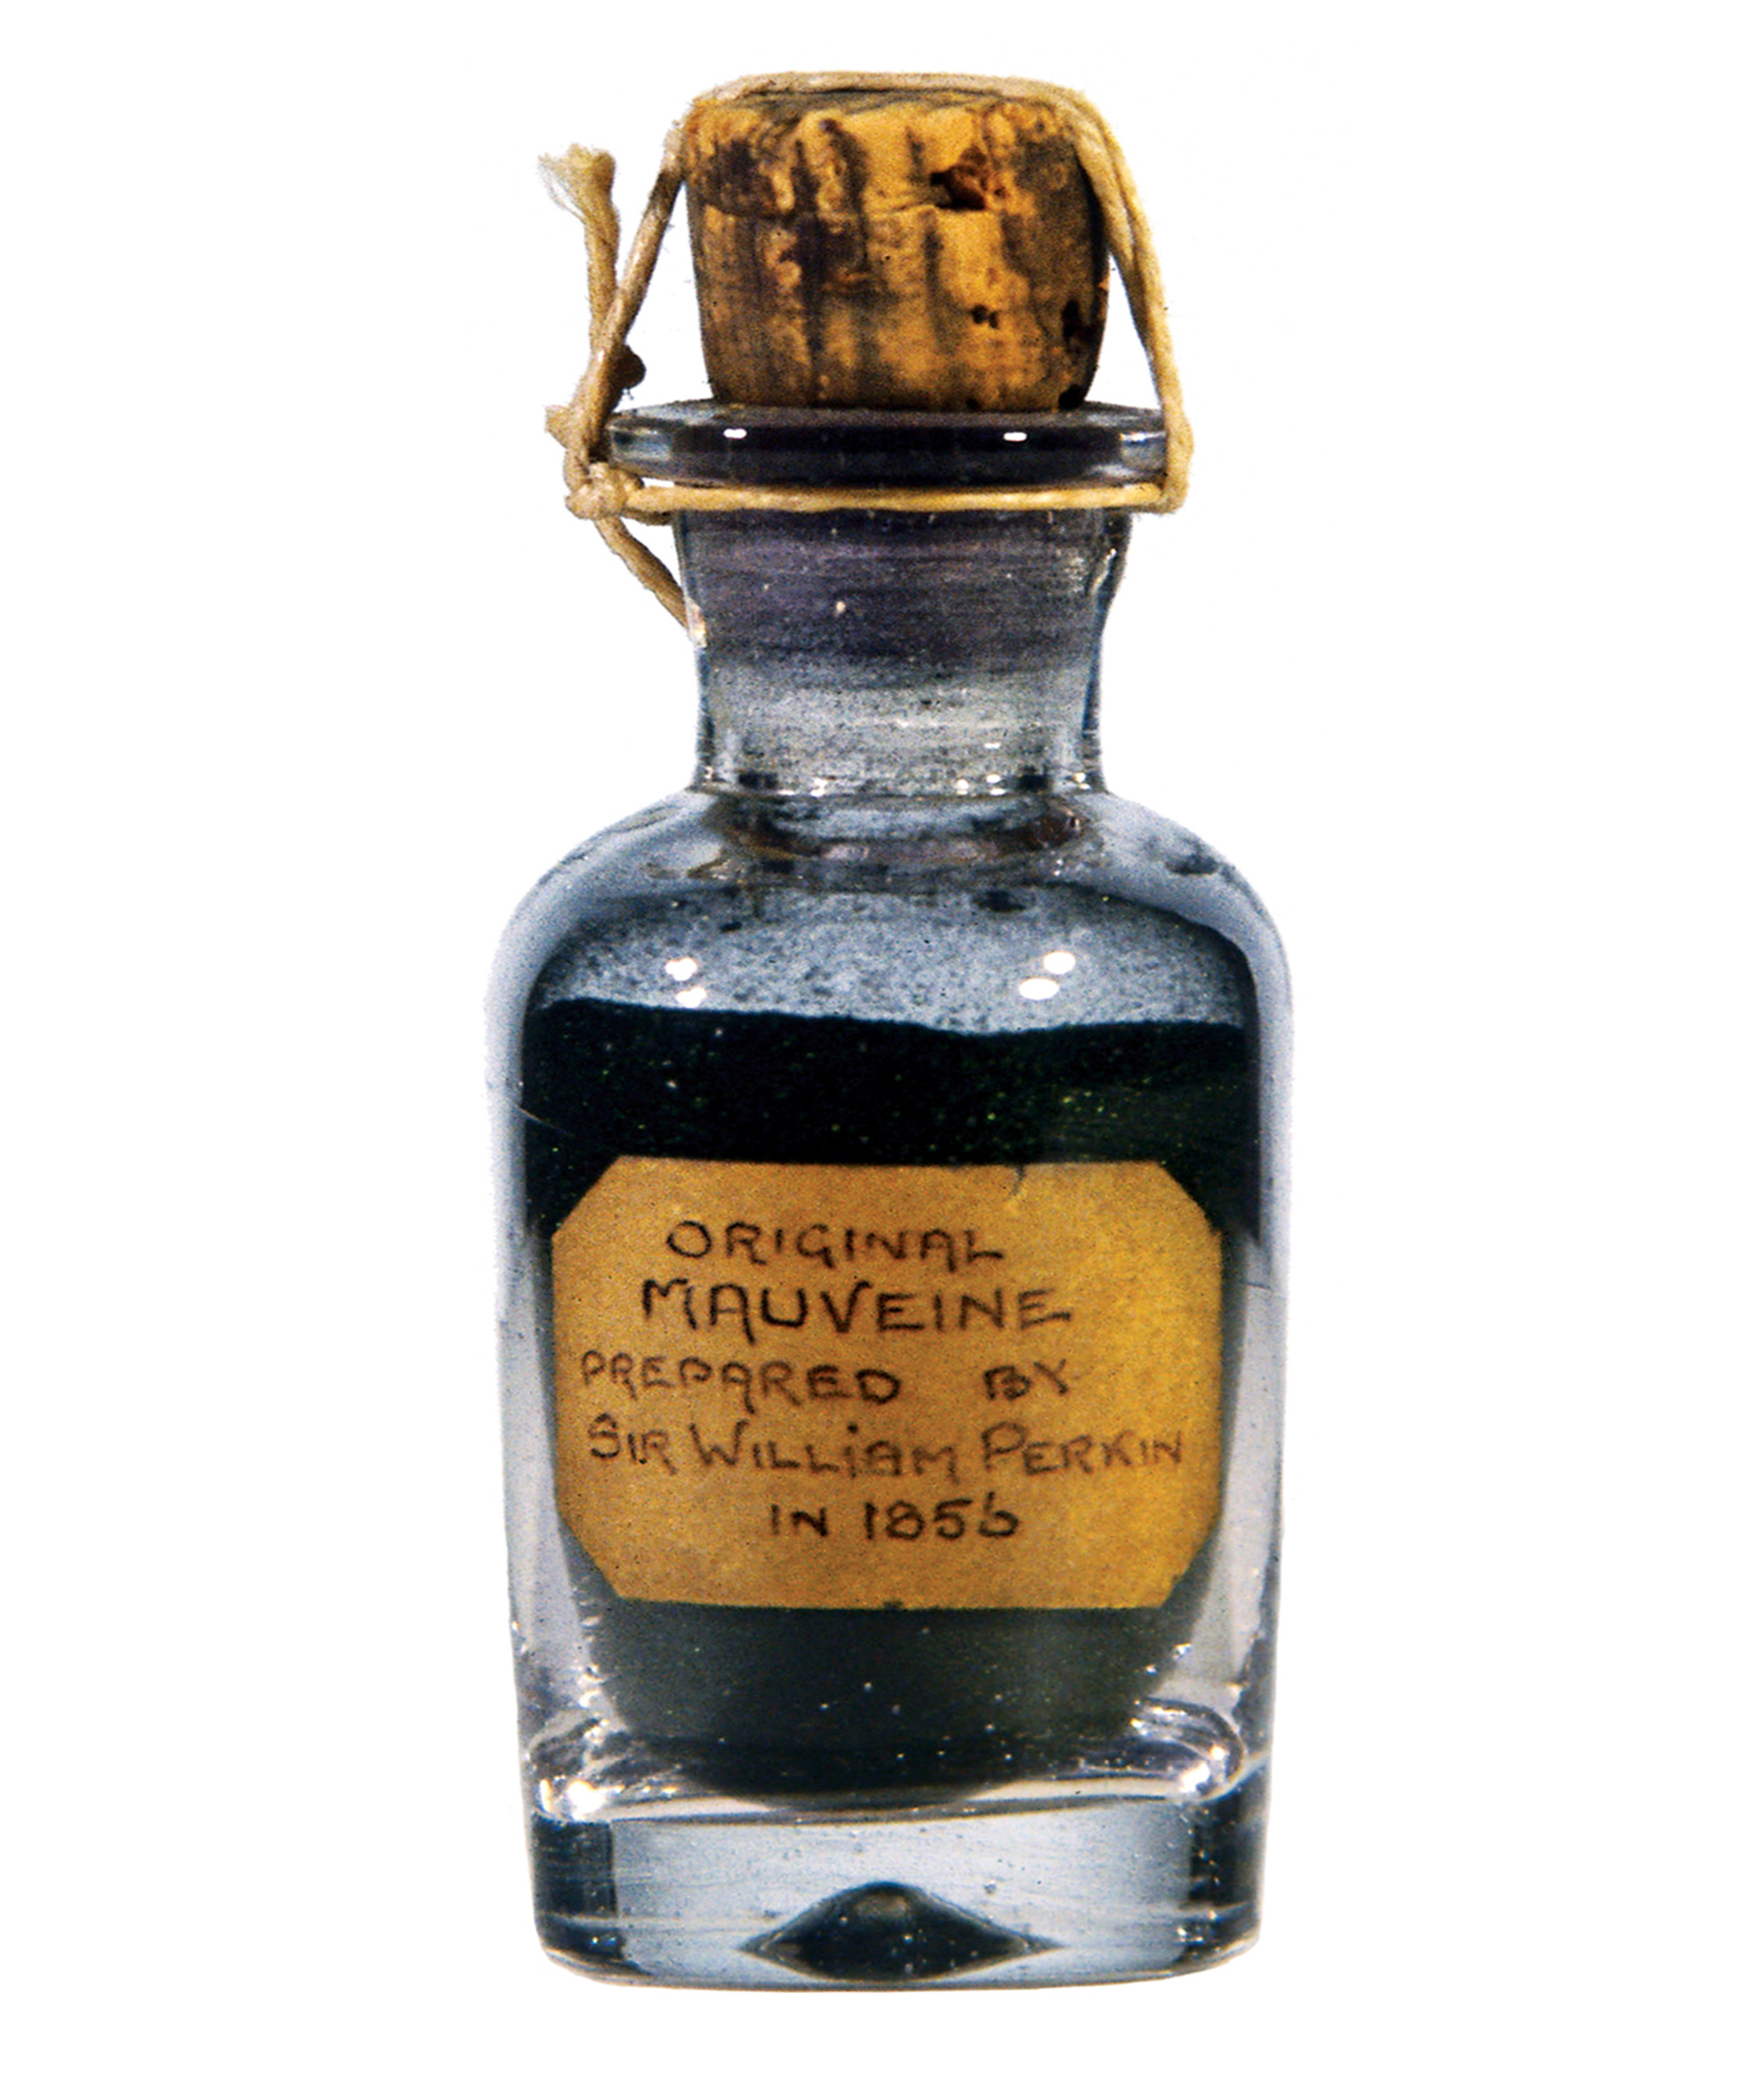 Sir William Perkin’s original mauve dye, 1856. Courtesy Science and Society Picture Library.